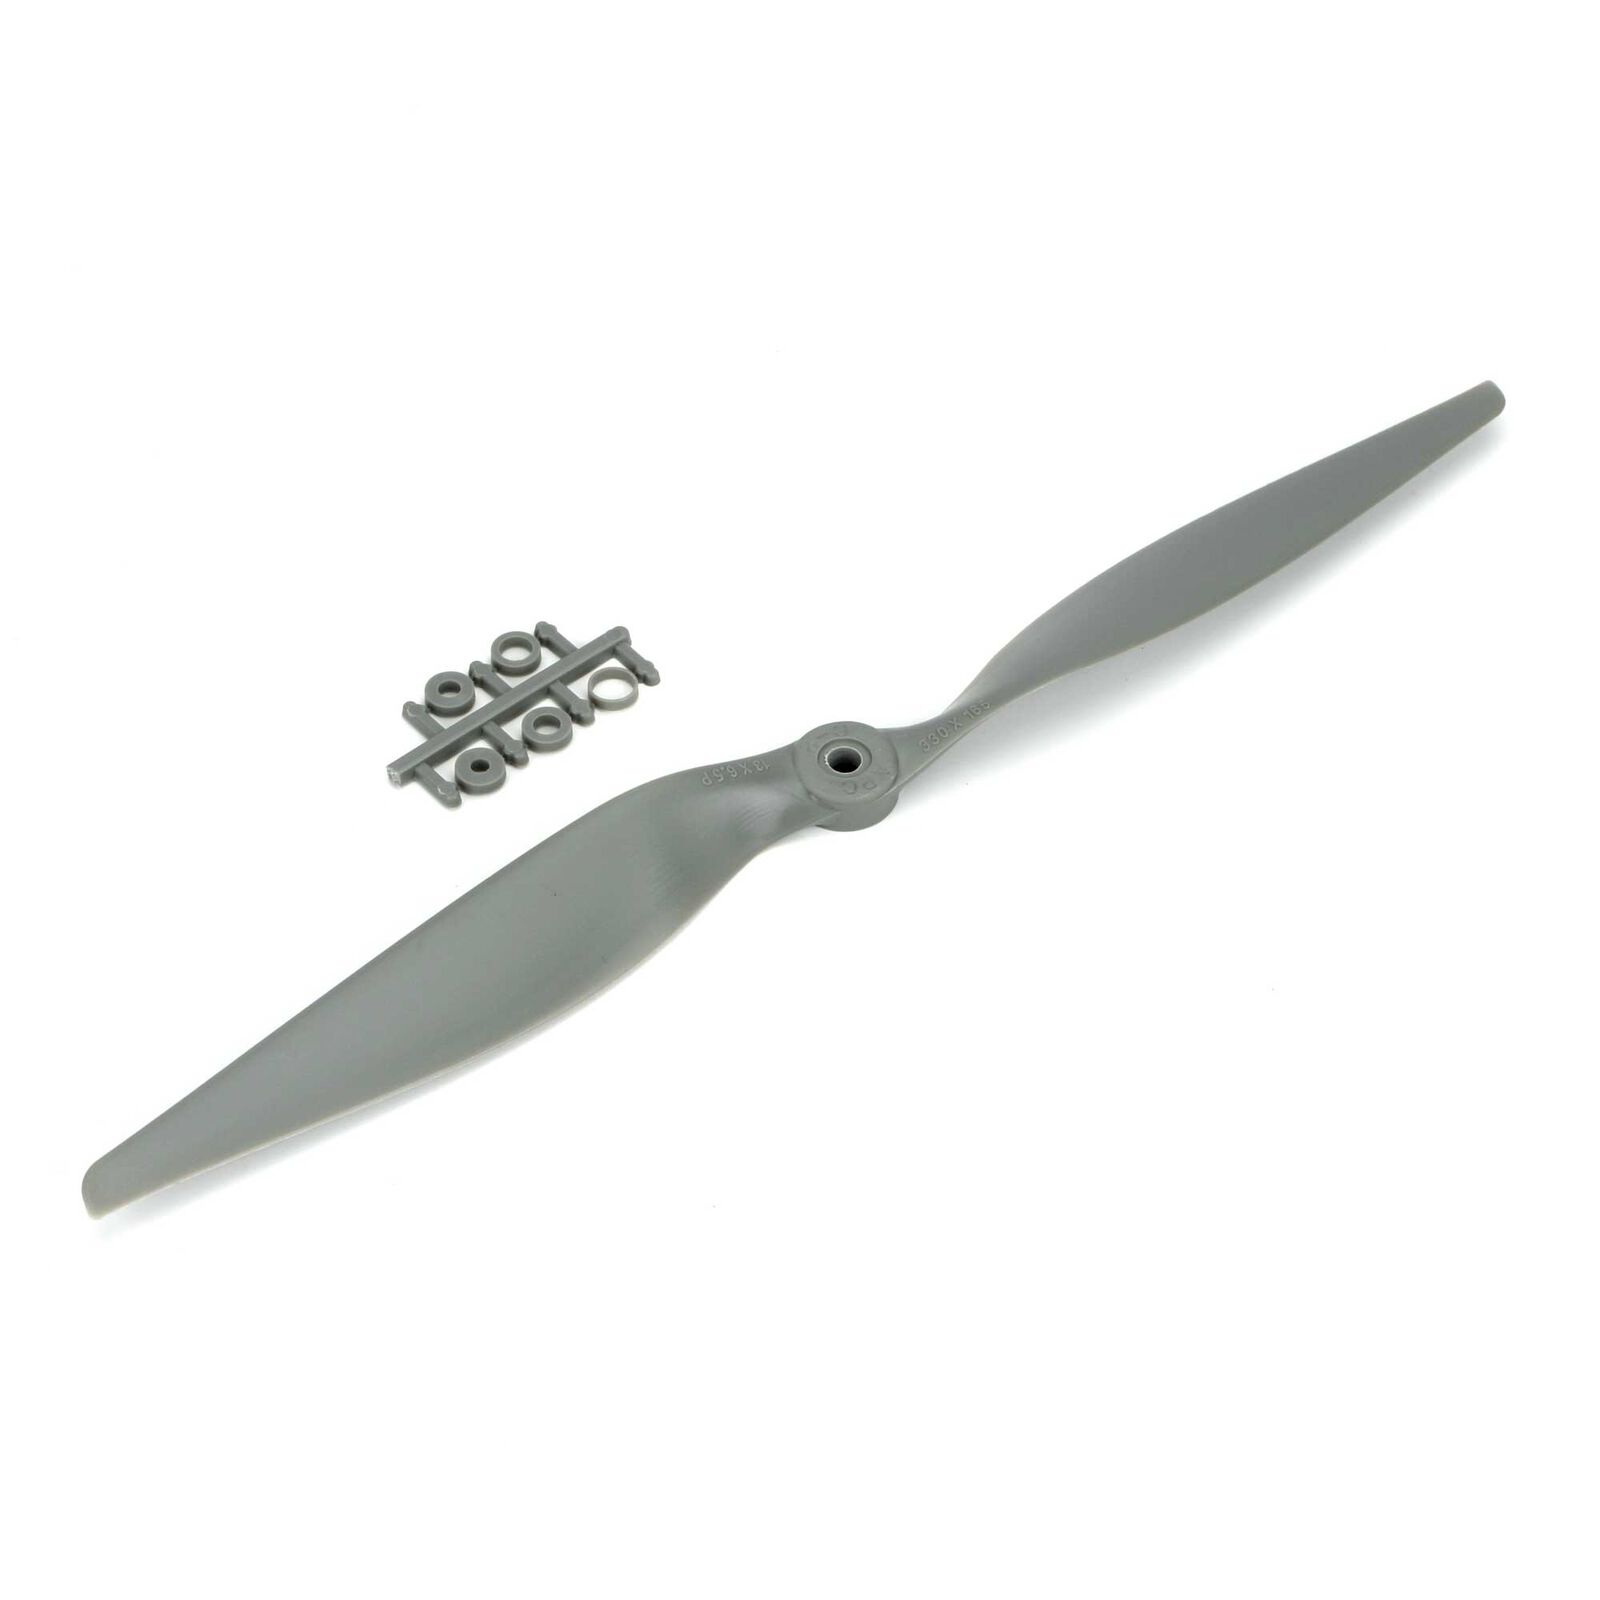 Thin Electric Pusher Propeller, 13 x 6.5 EP